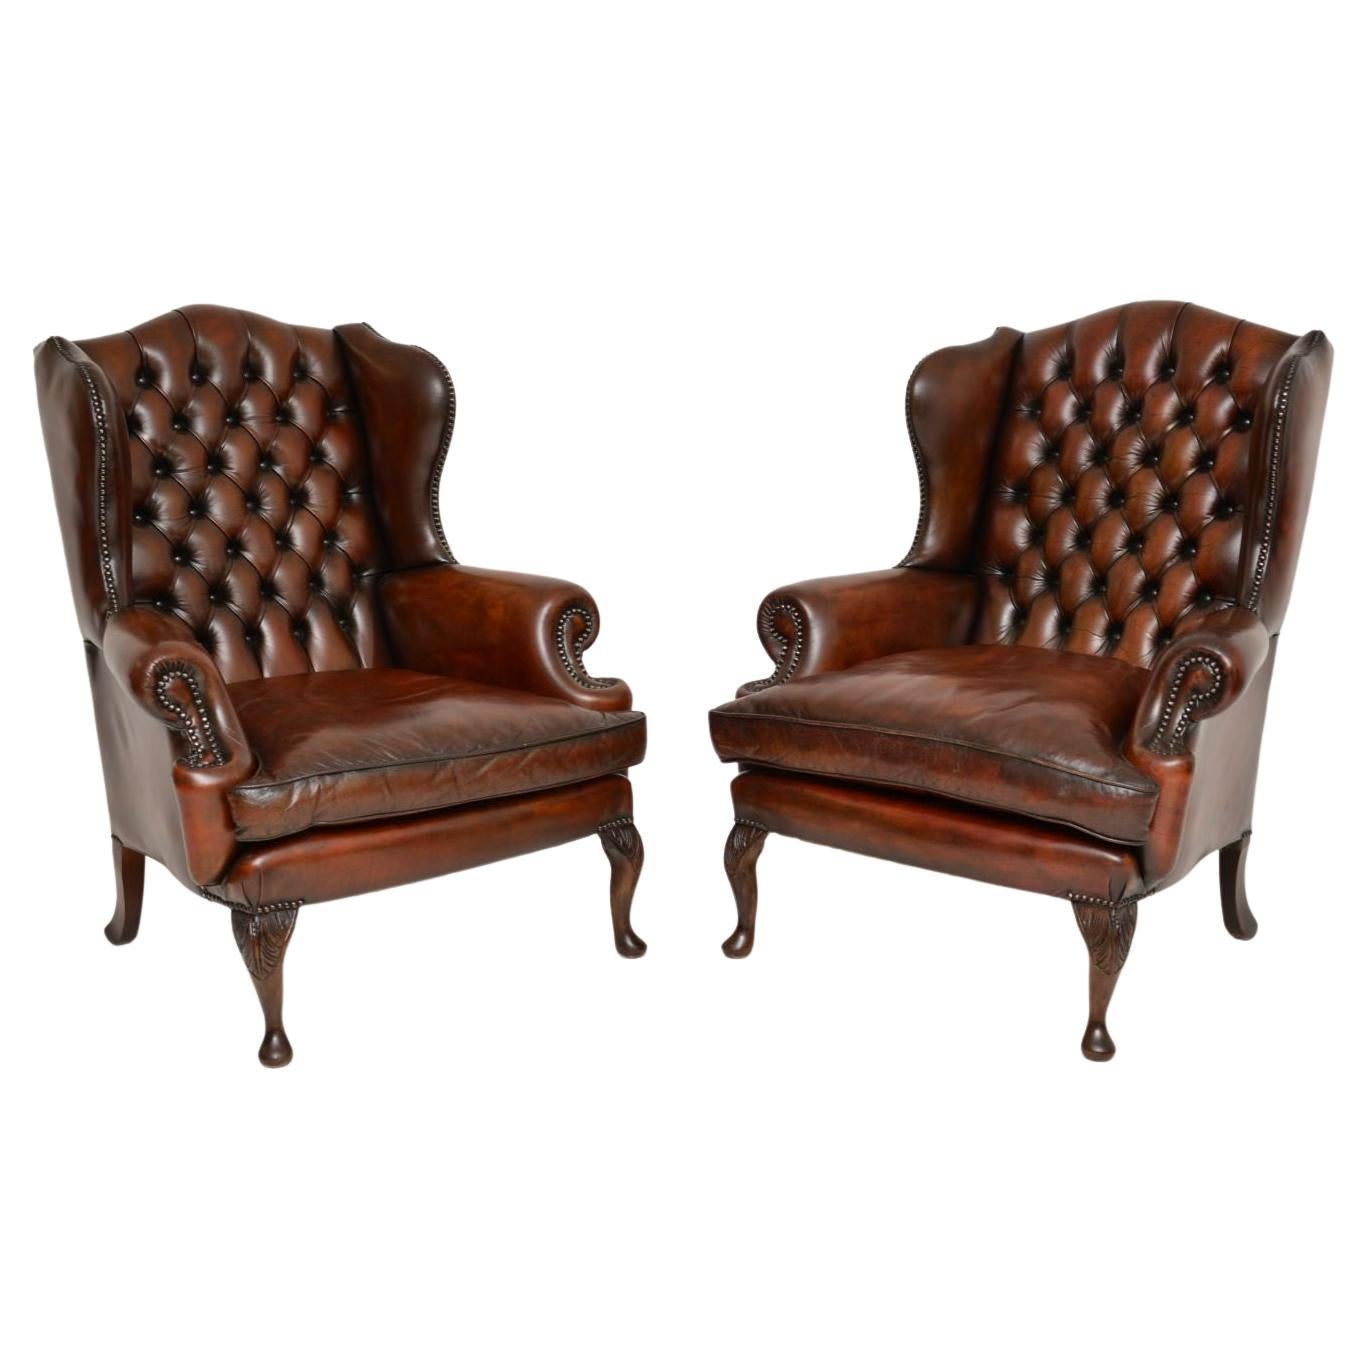 Pair of Antique Leather Wing Back Armchairs